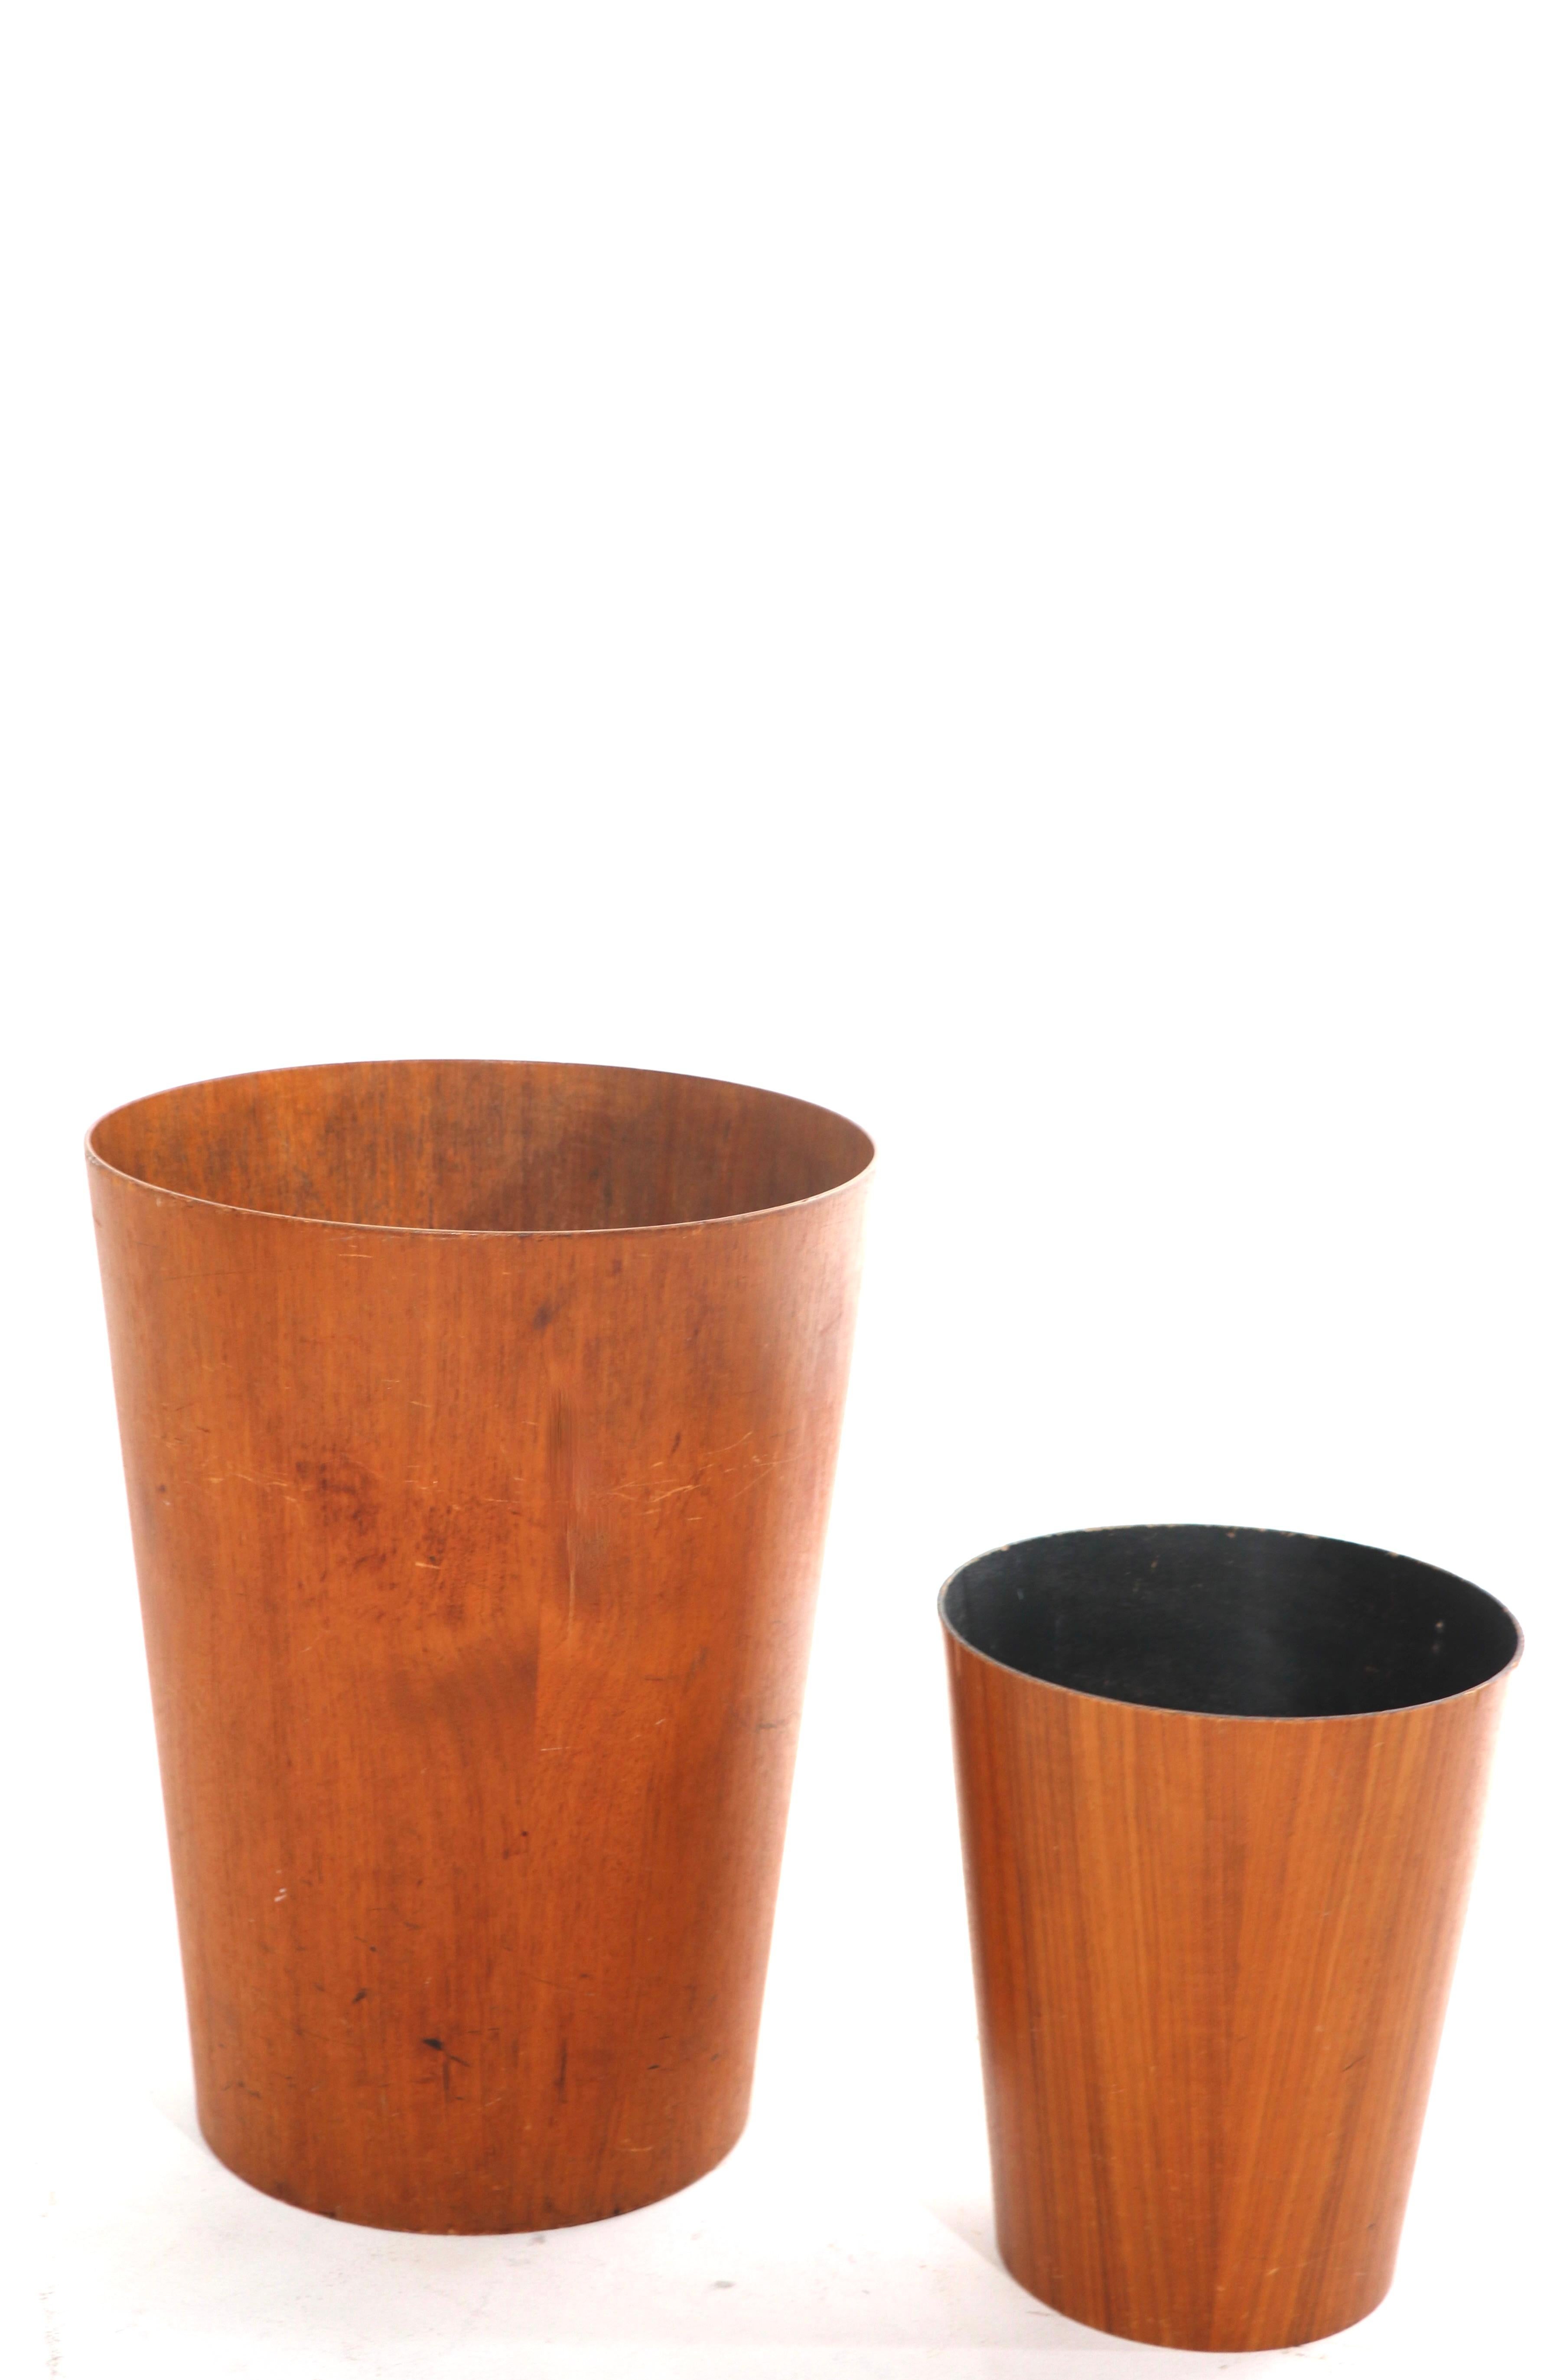 Unusual large scale teak trash can, shown next to a standard size version. This lot includes only the larger trash bin pictured. This example has some condition issues, specifically, a bruised at the bottom and non structural split in the body.